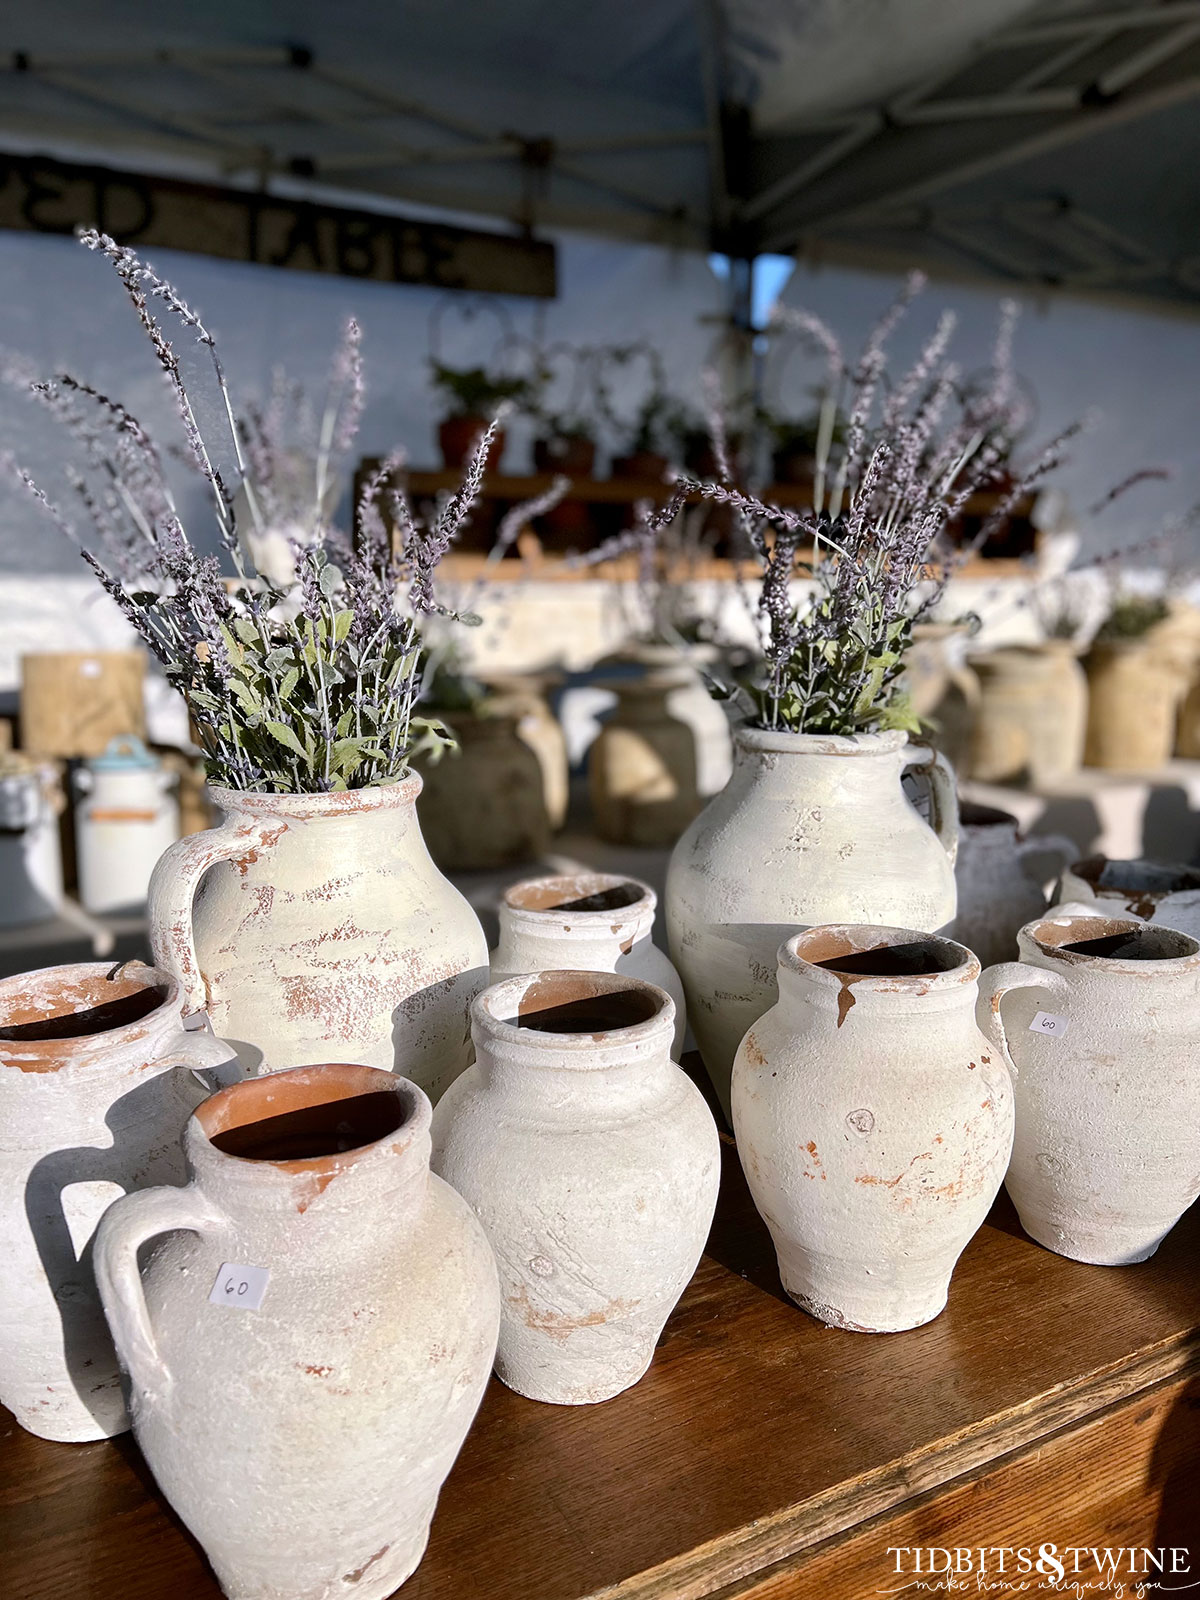 antique white pottery jugs some with lavender stems inside